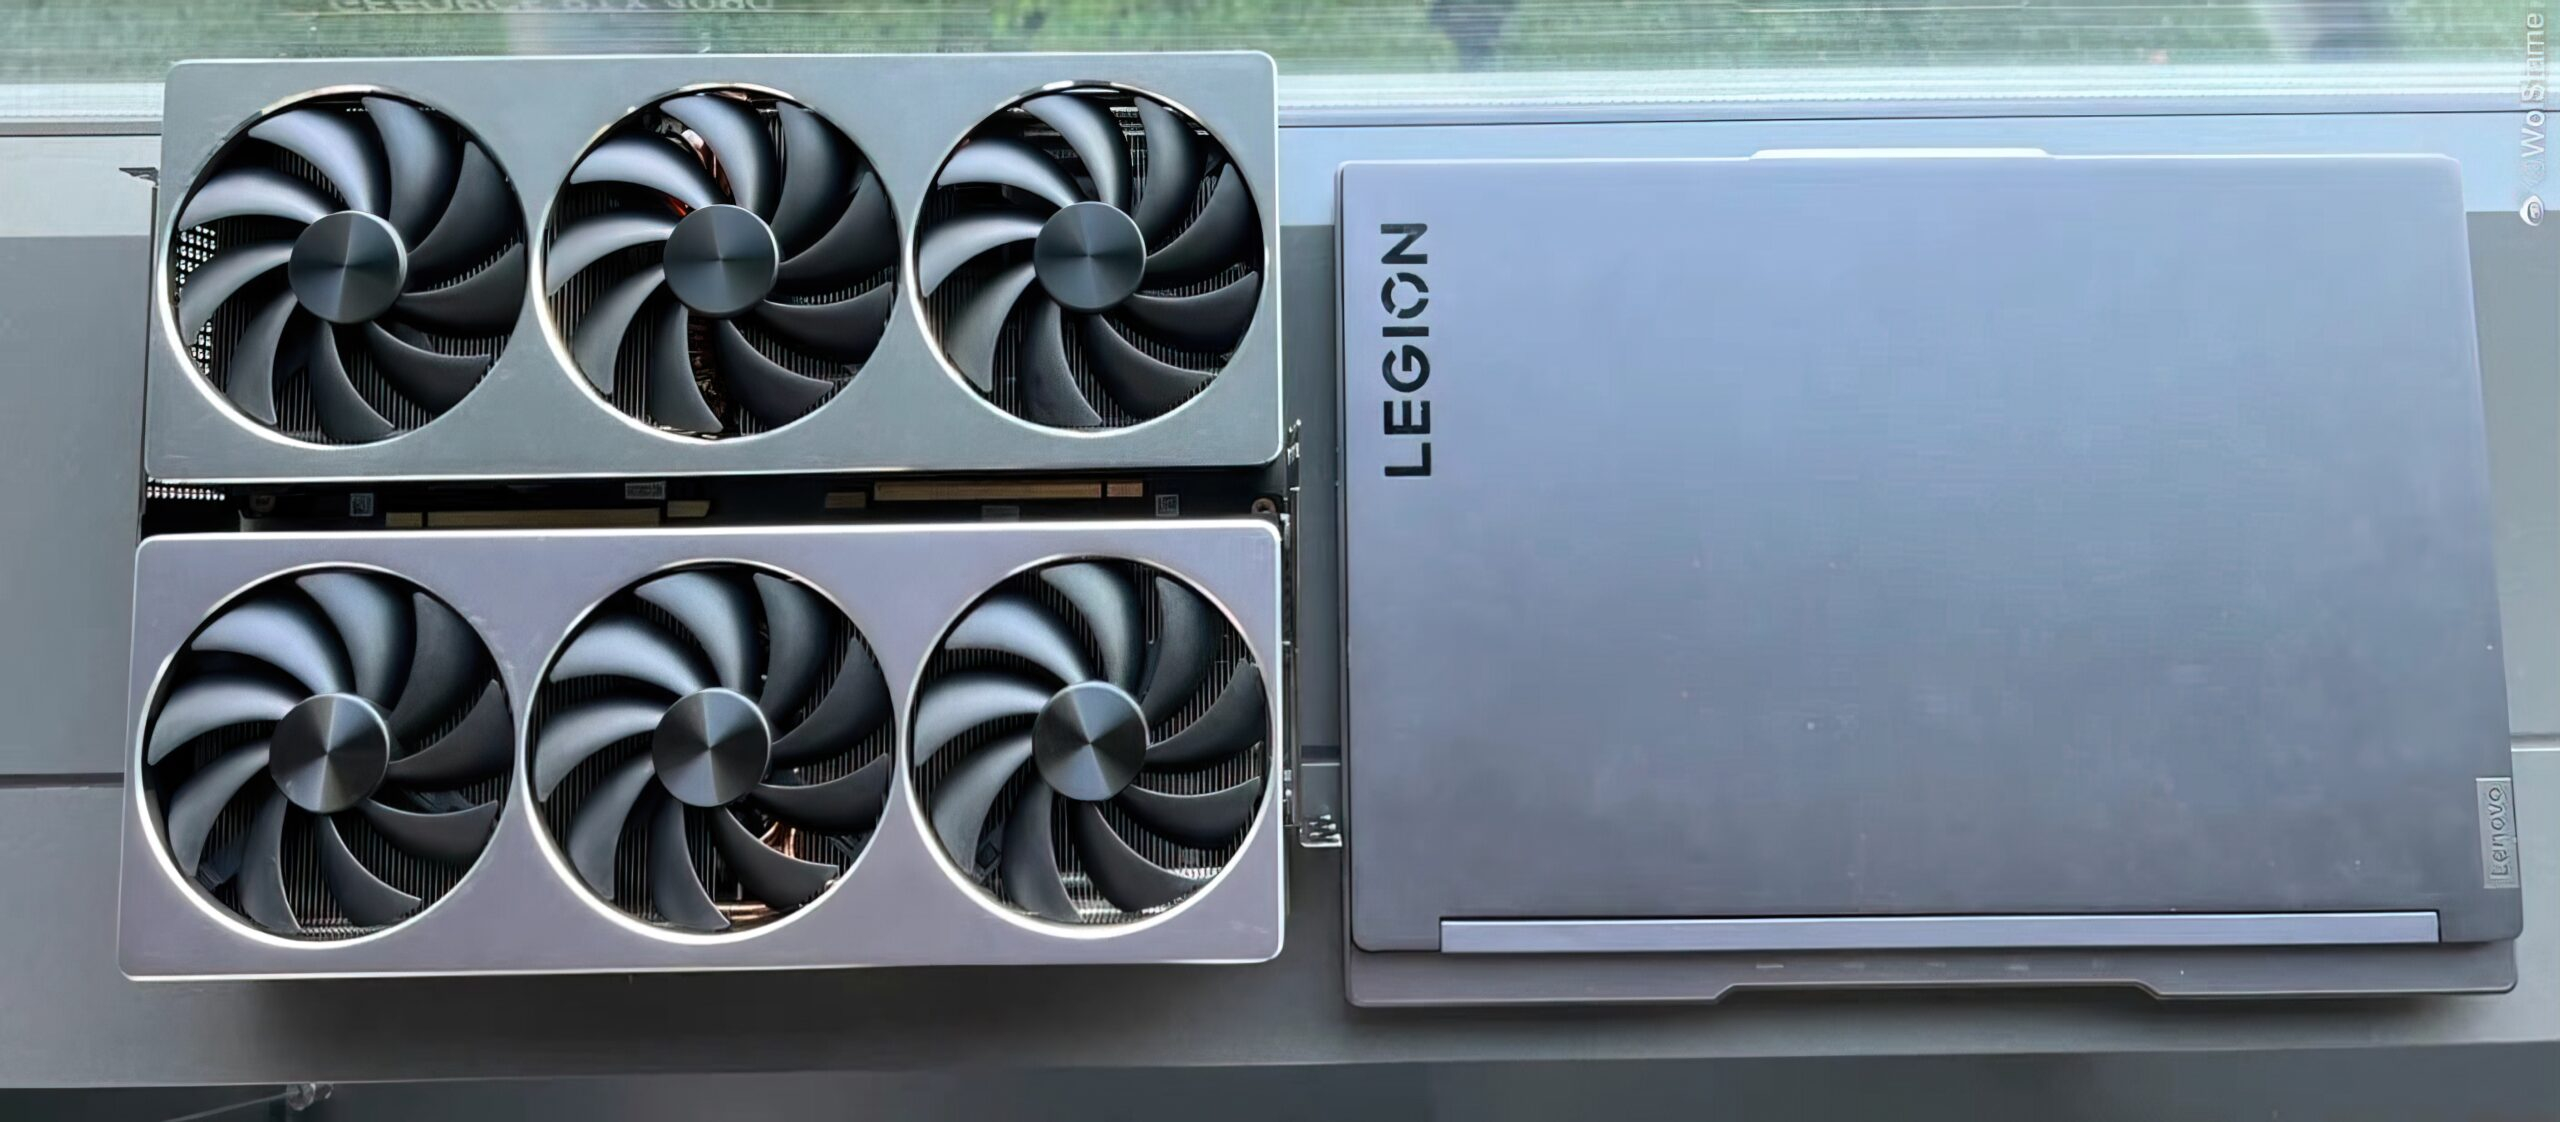 The left image is two graphic cards, and on the right is a corps laptop